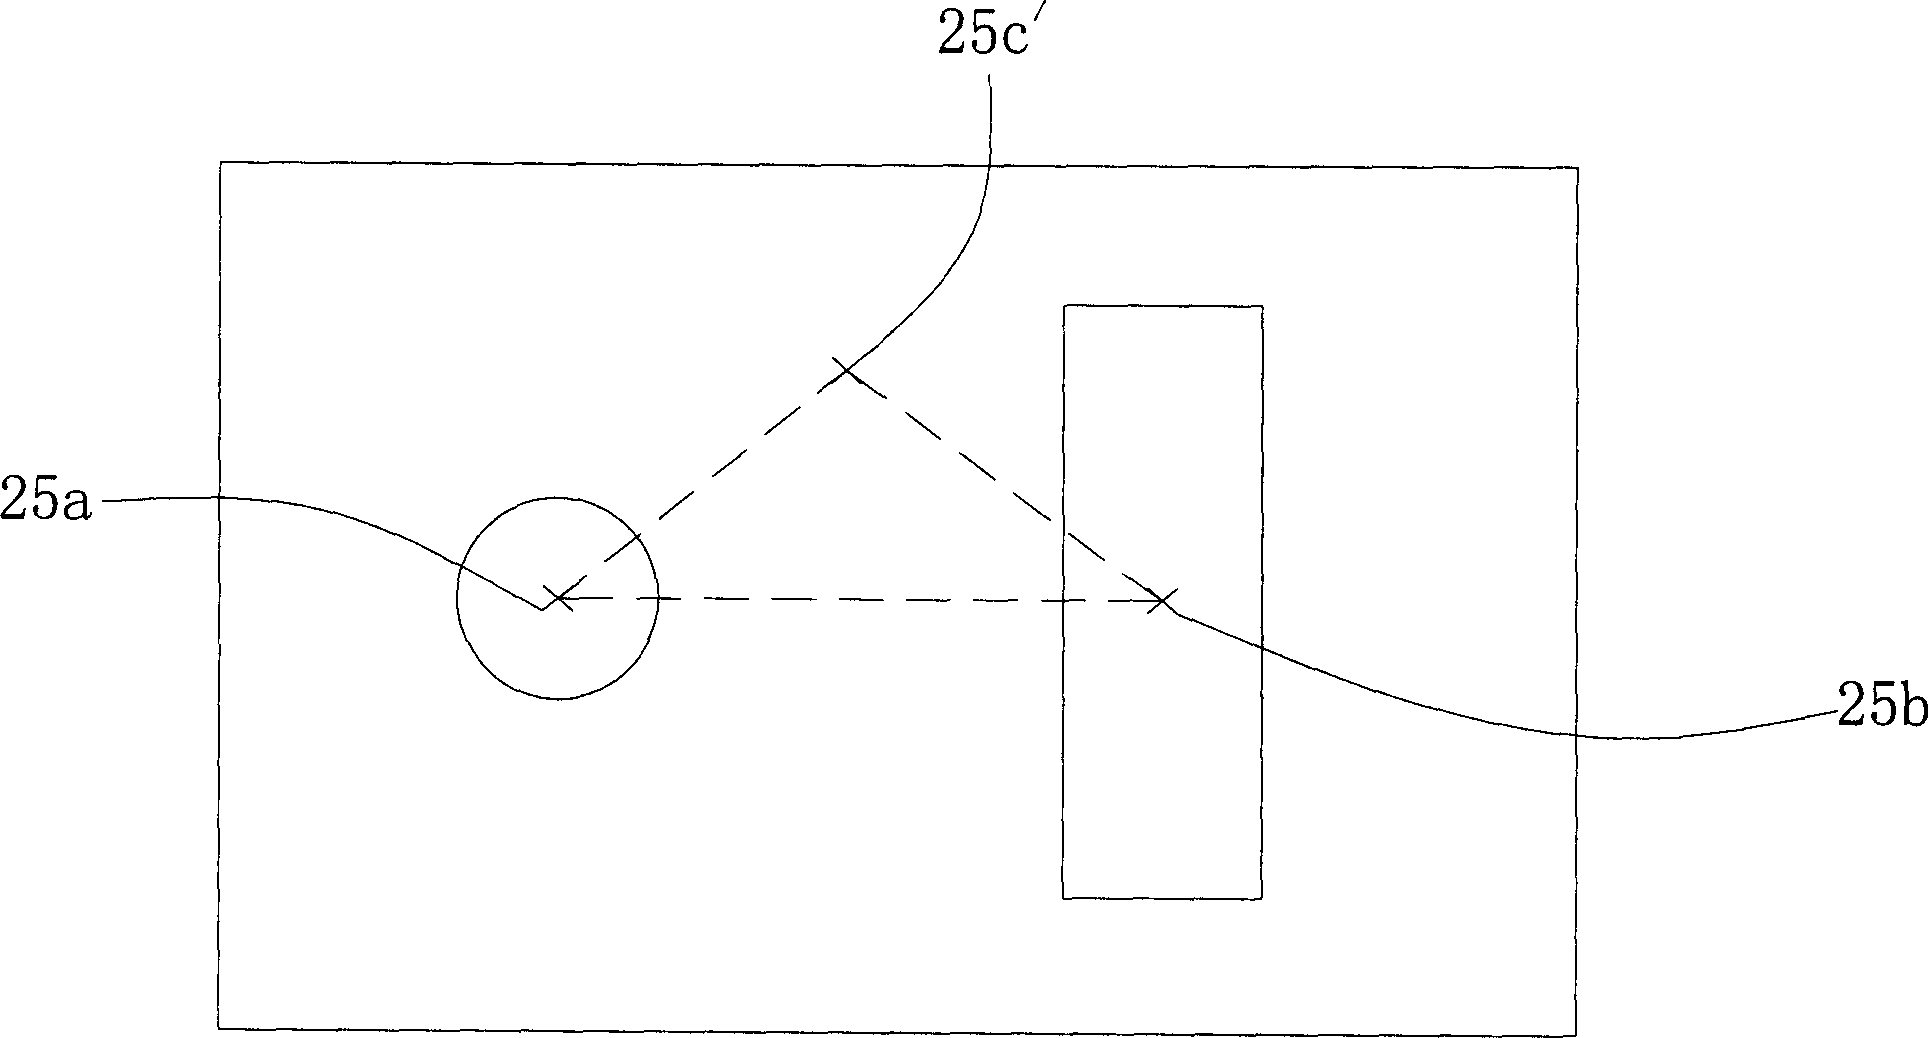 Visual contraposition method of not corresponding basis material